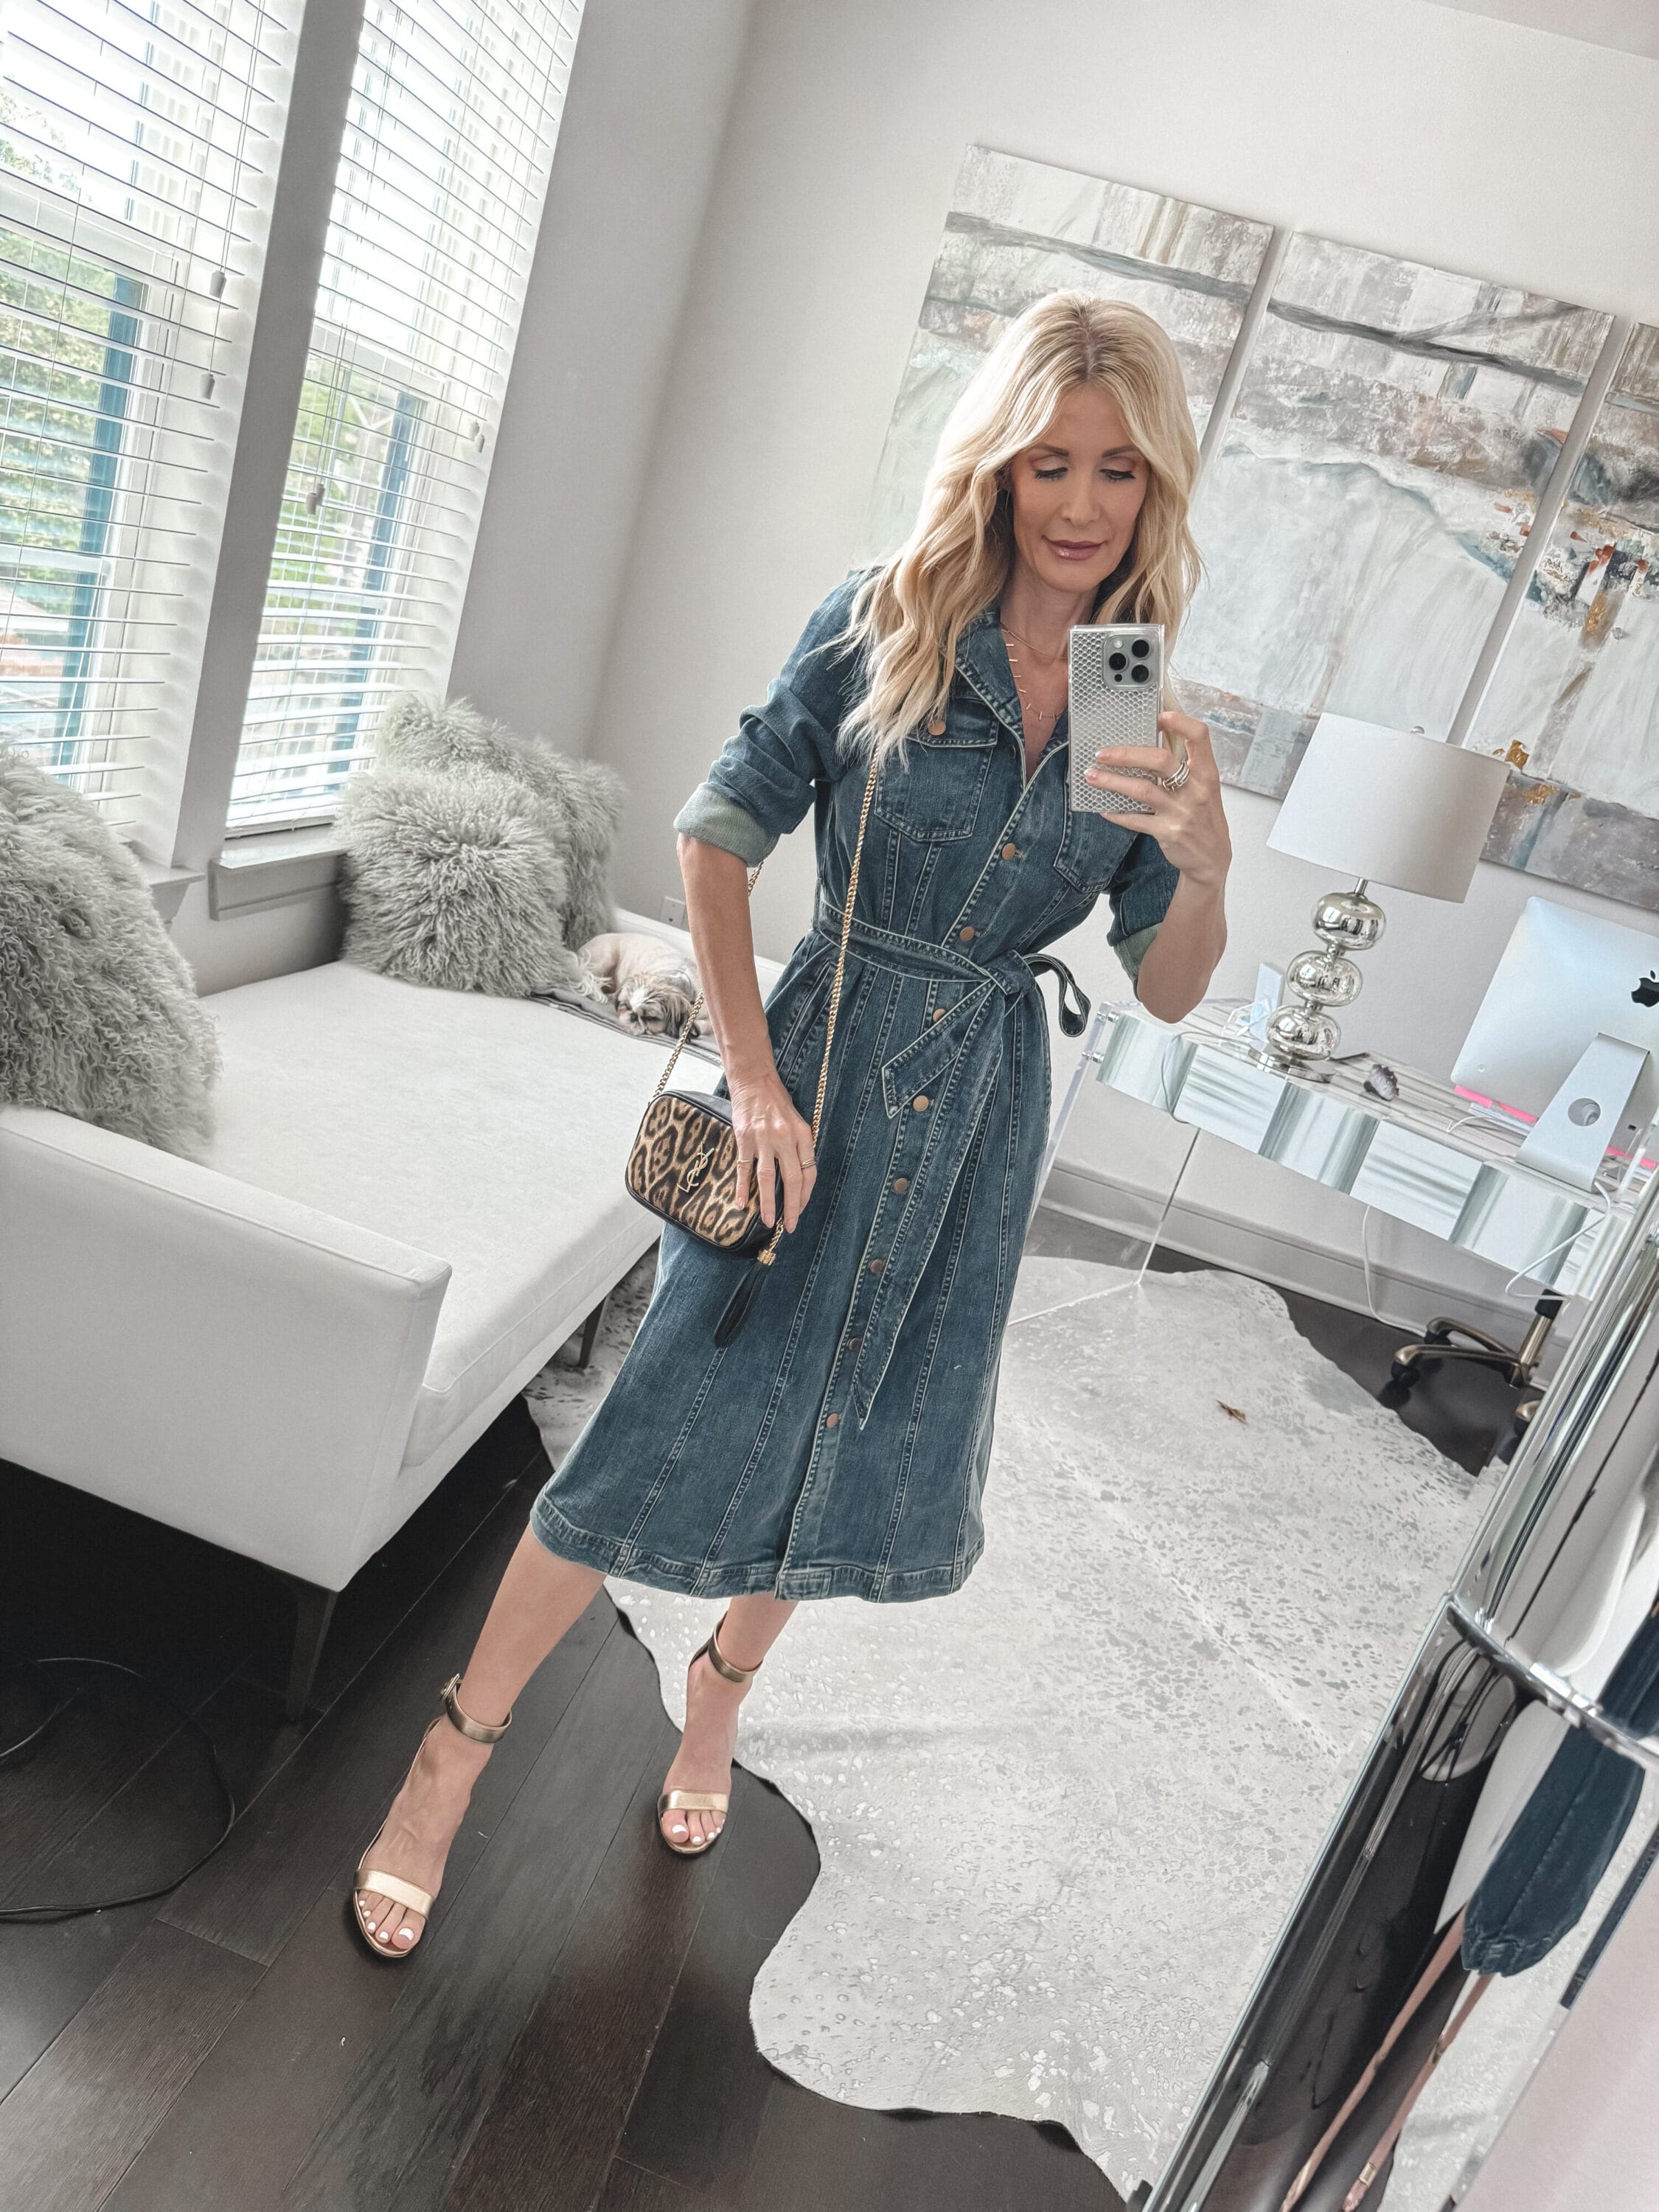 Dallas fashion influencer for women over 40 wearing a denim dress with gold heels as one of 5 stylish spring looks.